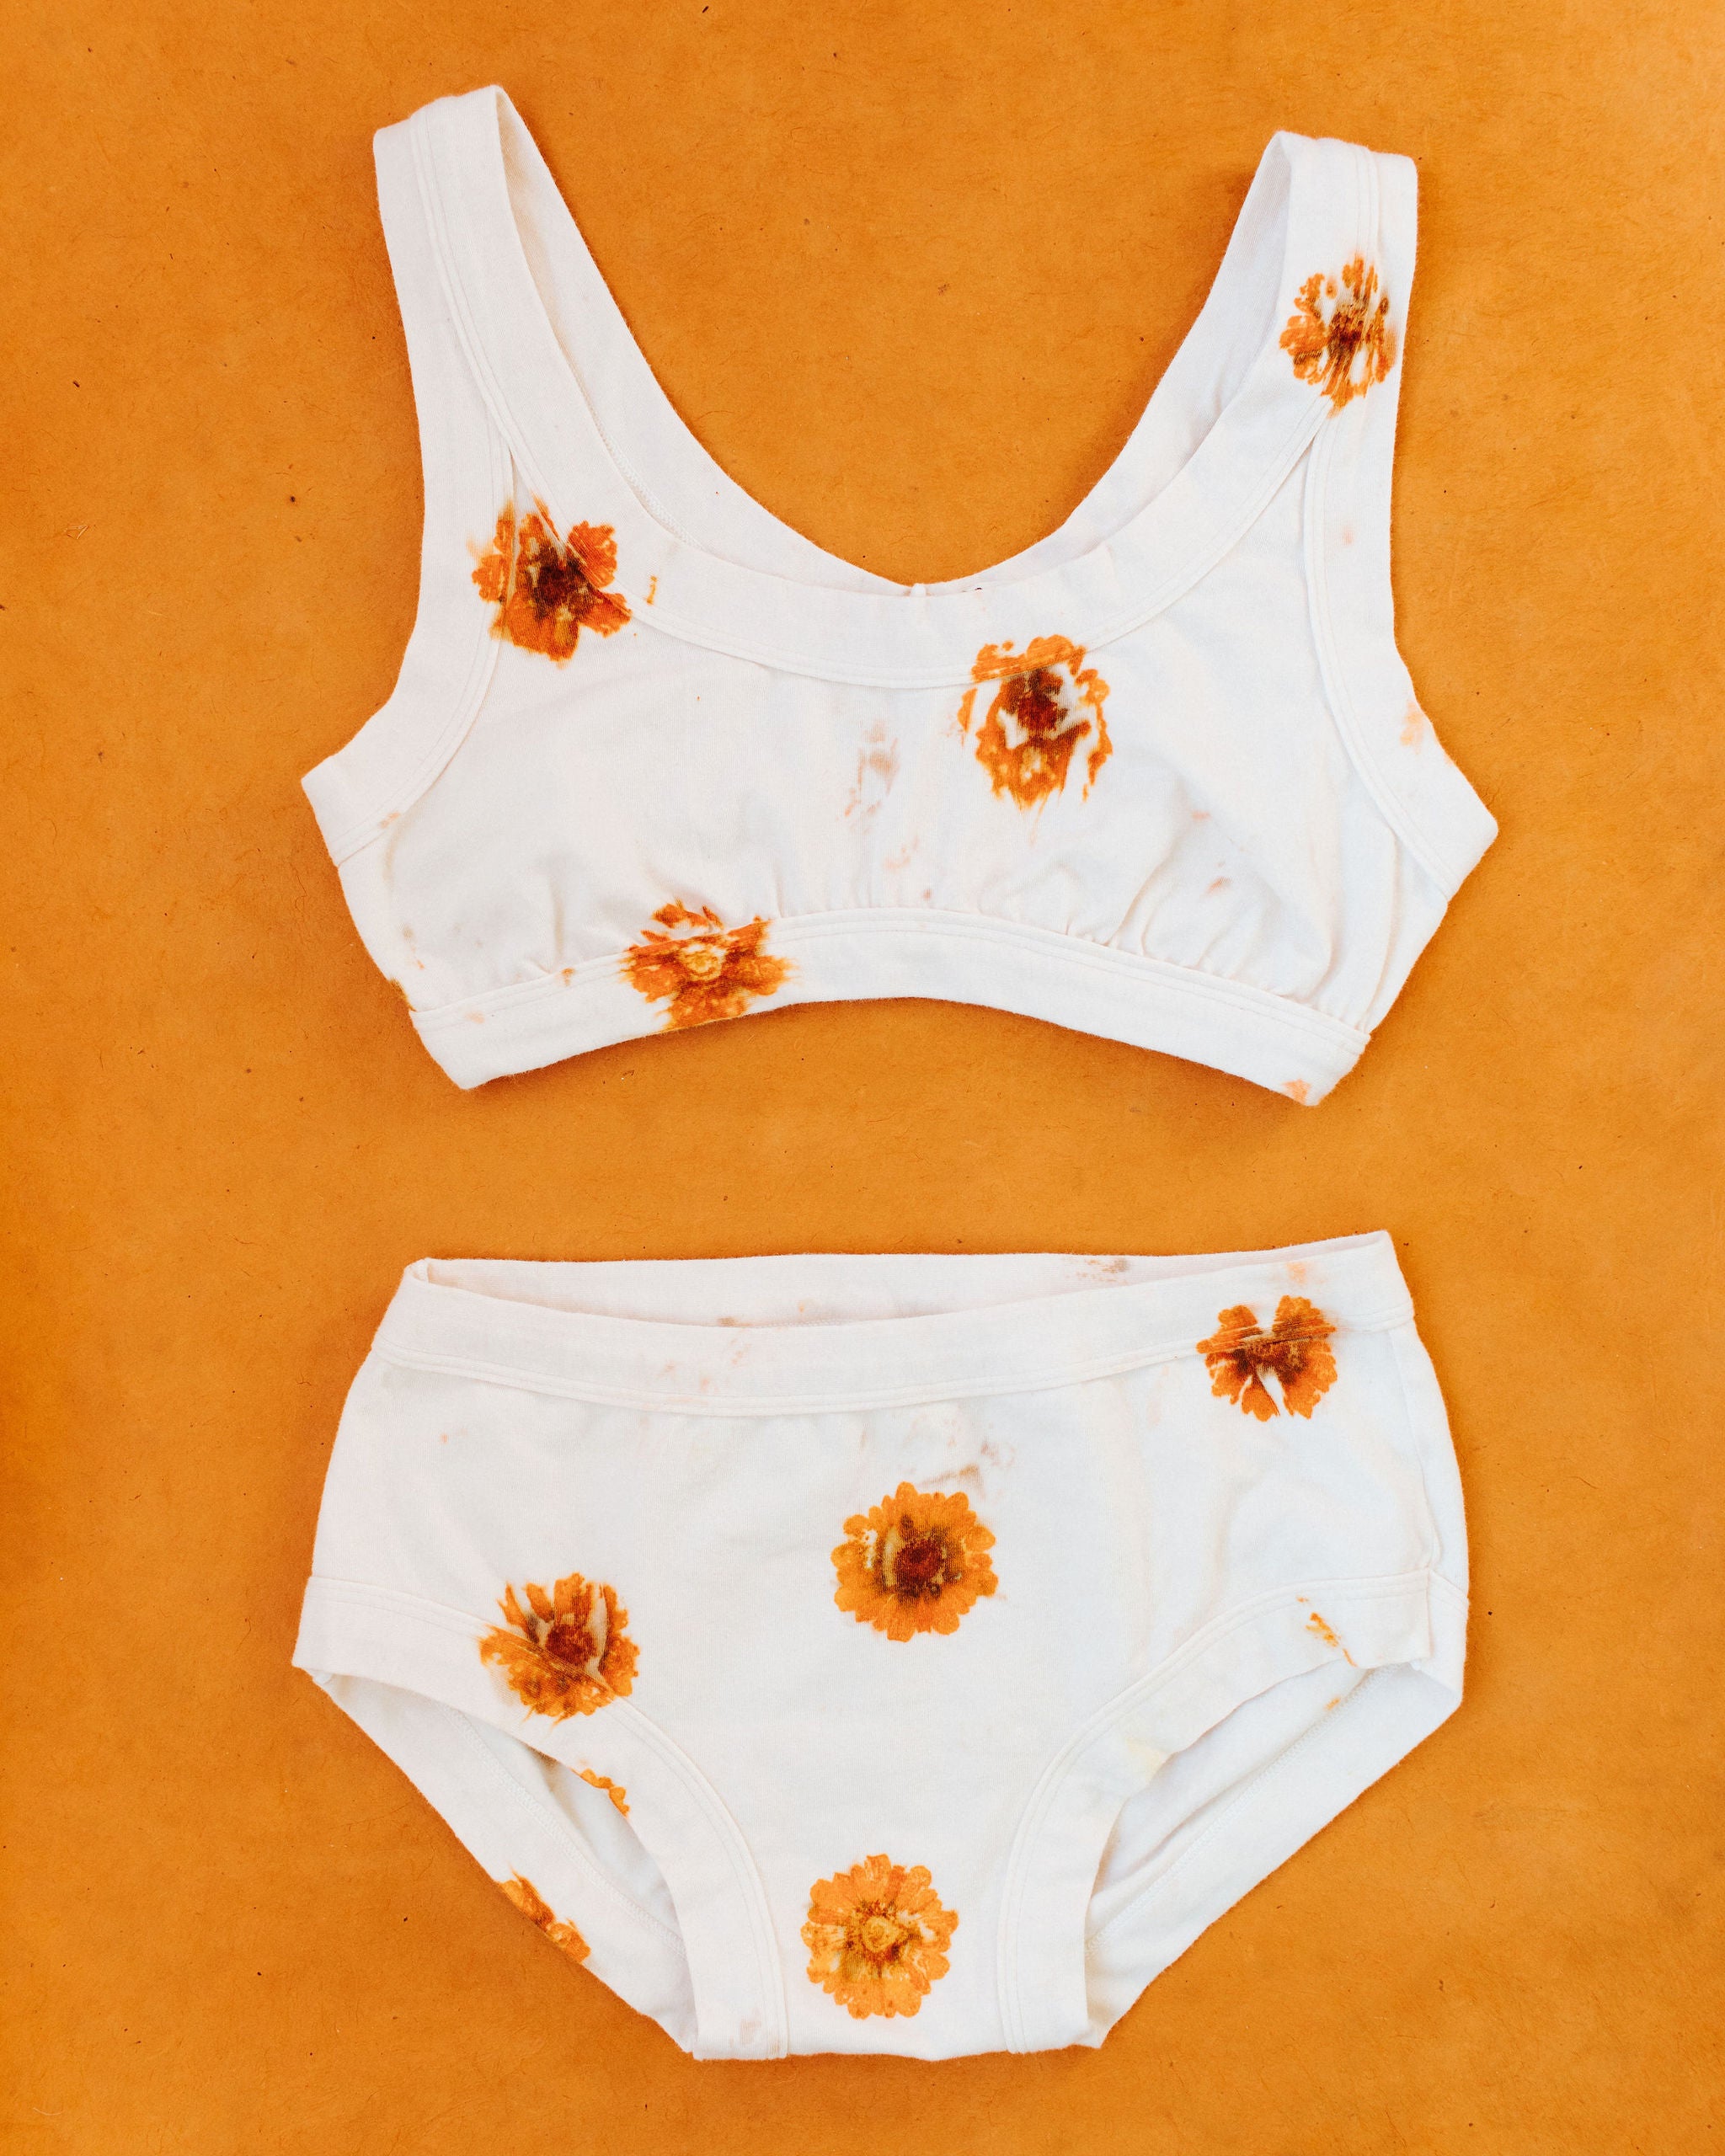 Flat lay on an orange surface of Thunderpants Hipster style underwear and Bralette in the Limited Edition Flower Press Botanical Dye - flowers pressed onto the fabric to create a print.